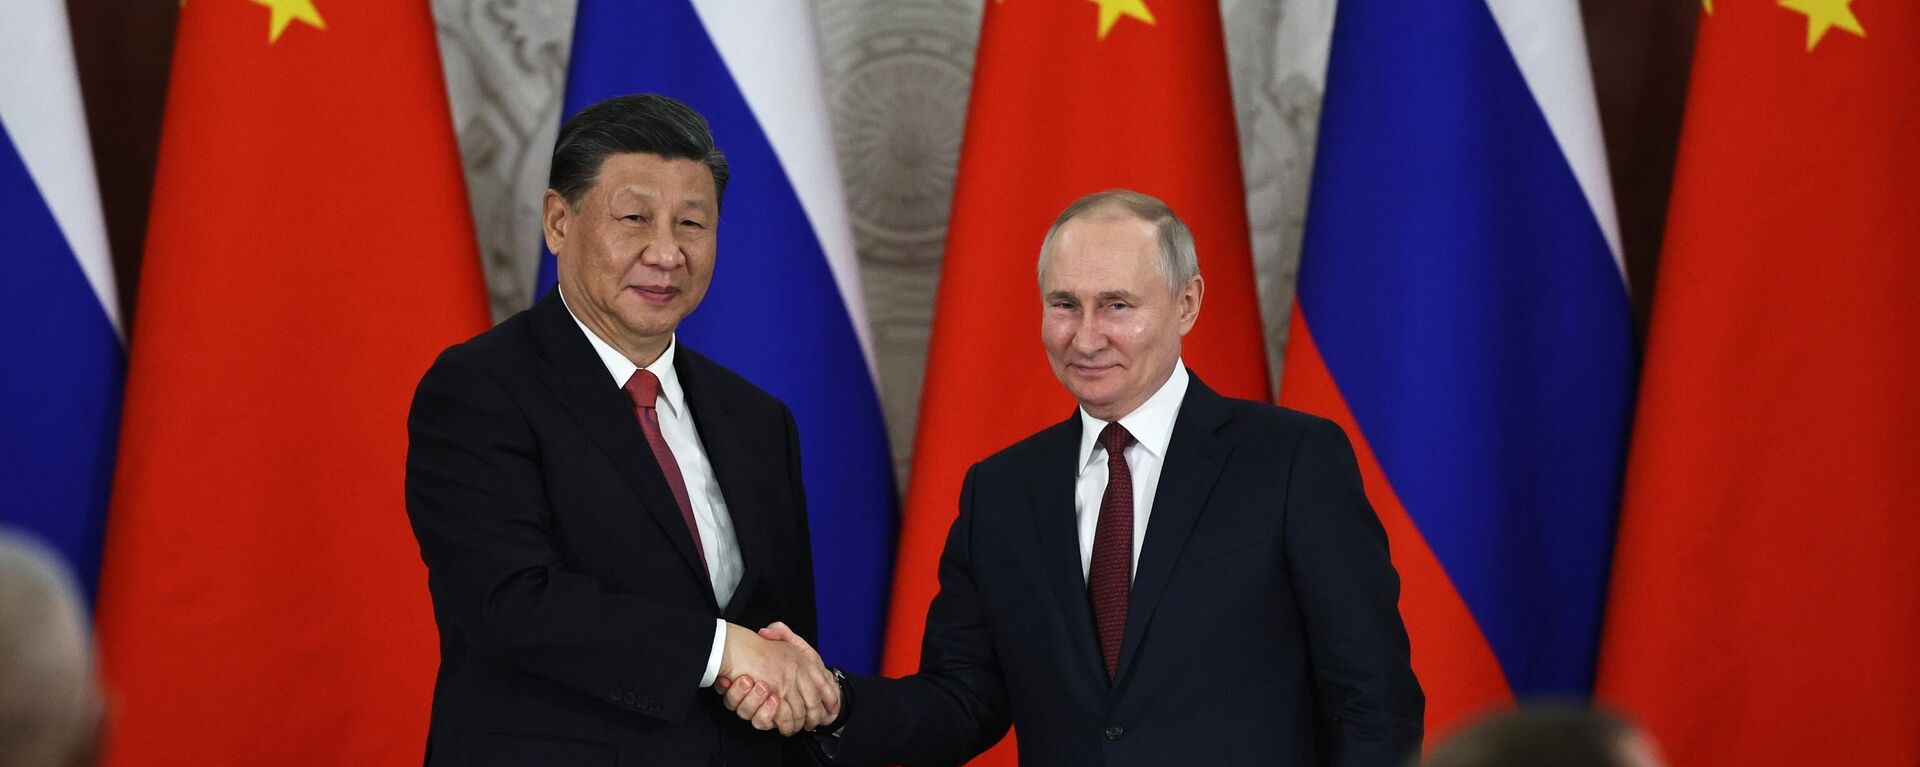 Russian President Vladimir Putin, right, and Chinese President Xi Jinping shake hands after speaking to the media during a signing ceremony following their talks at The Grand Kremlin Palace, in Moscow, Russia, March 21, 2023 - Sputnik International, 1920, 05.06.2024